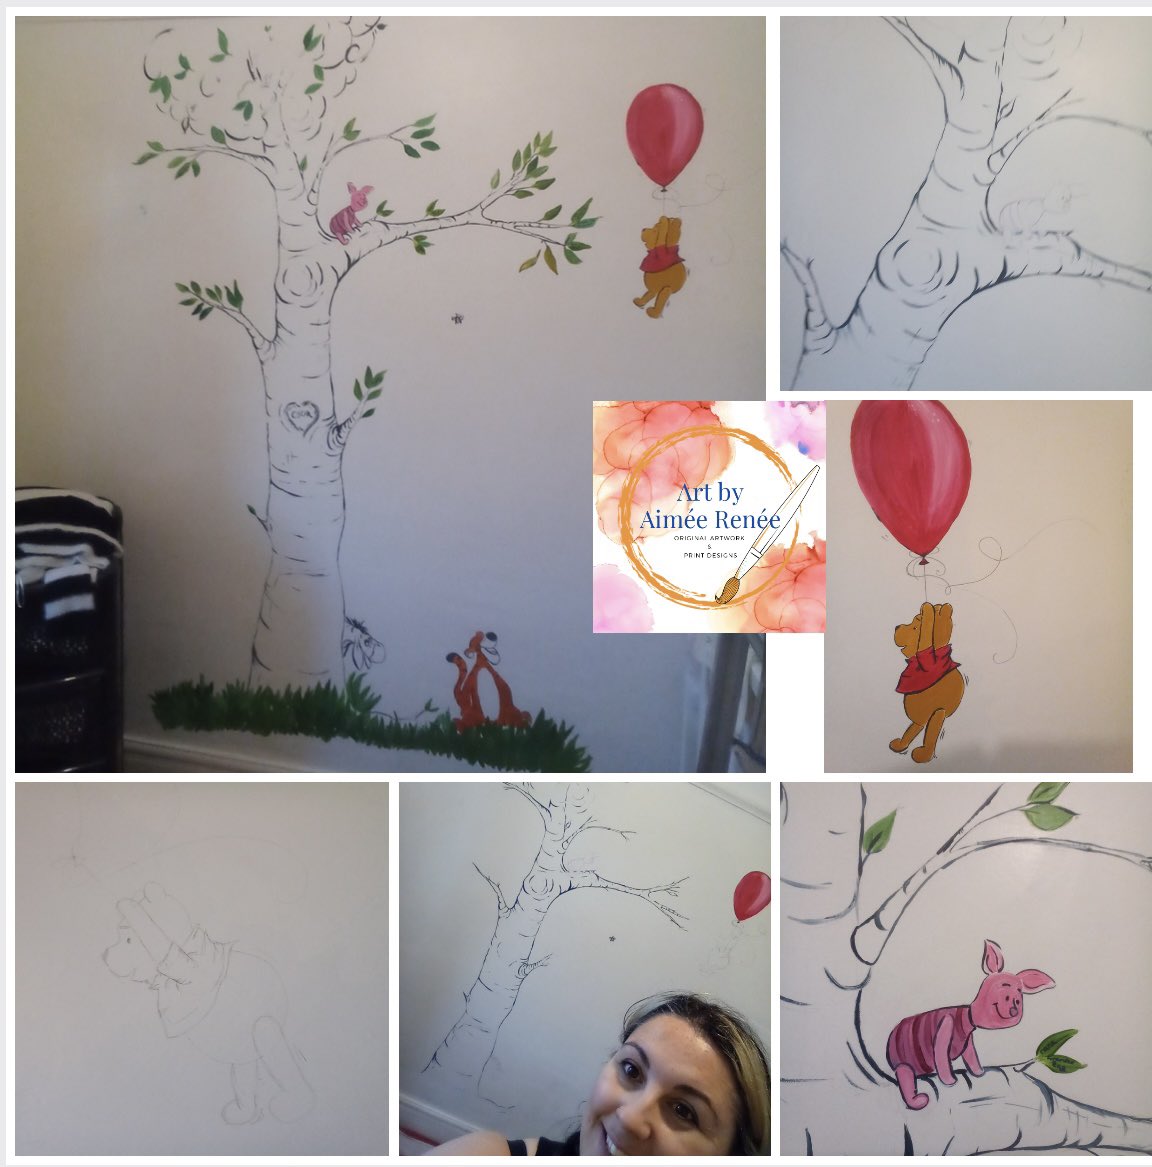 Had so much fun painting this mural , a lovely commission for a lovely little family . 🖤
#artforyourhome  #muralart #artymum #artist #nursery #mural #NorthWales